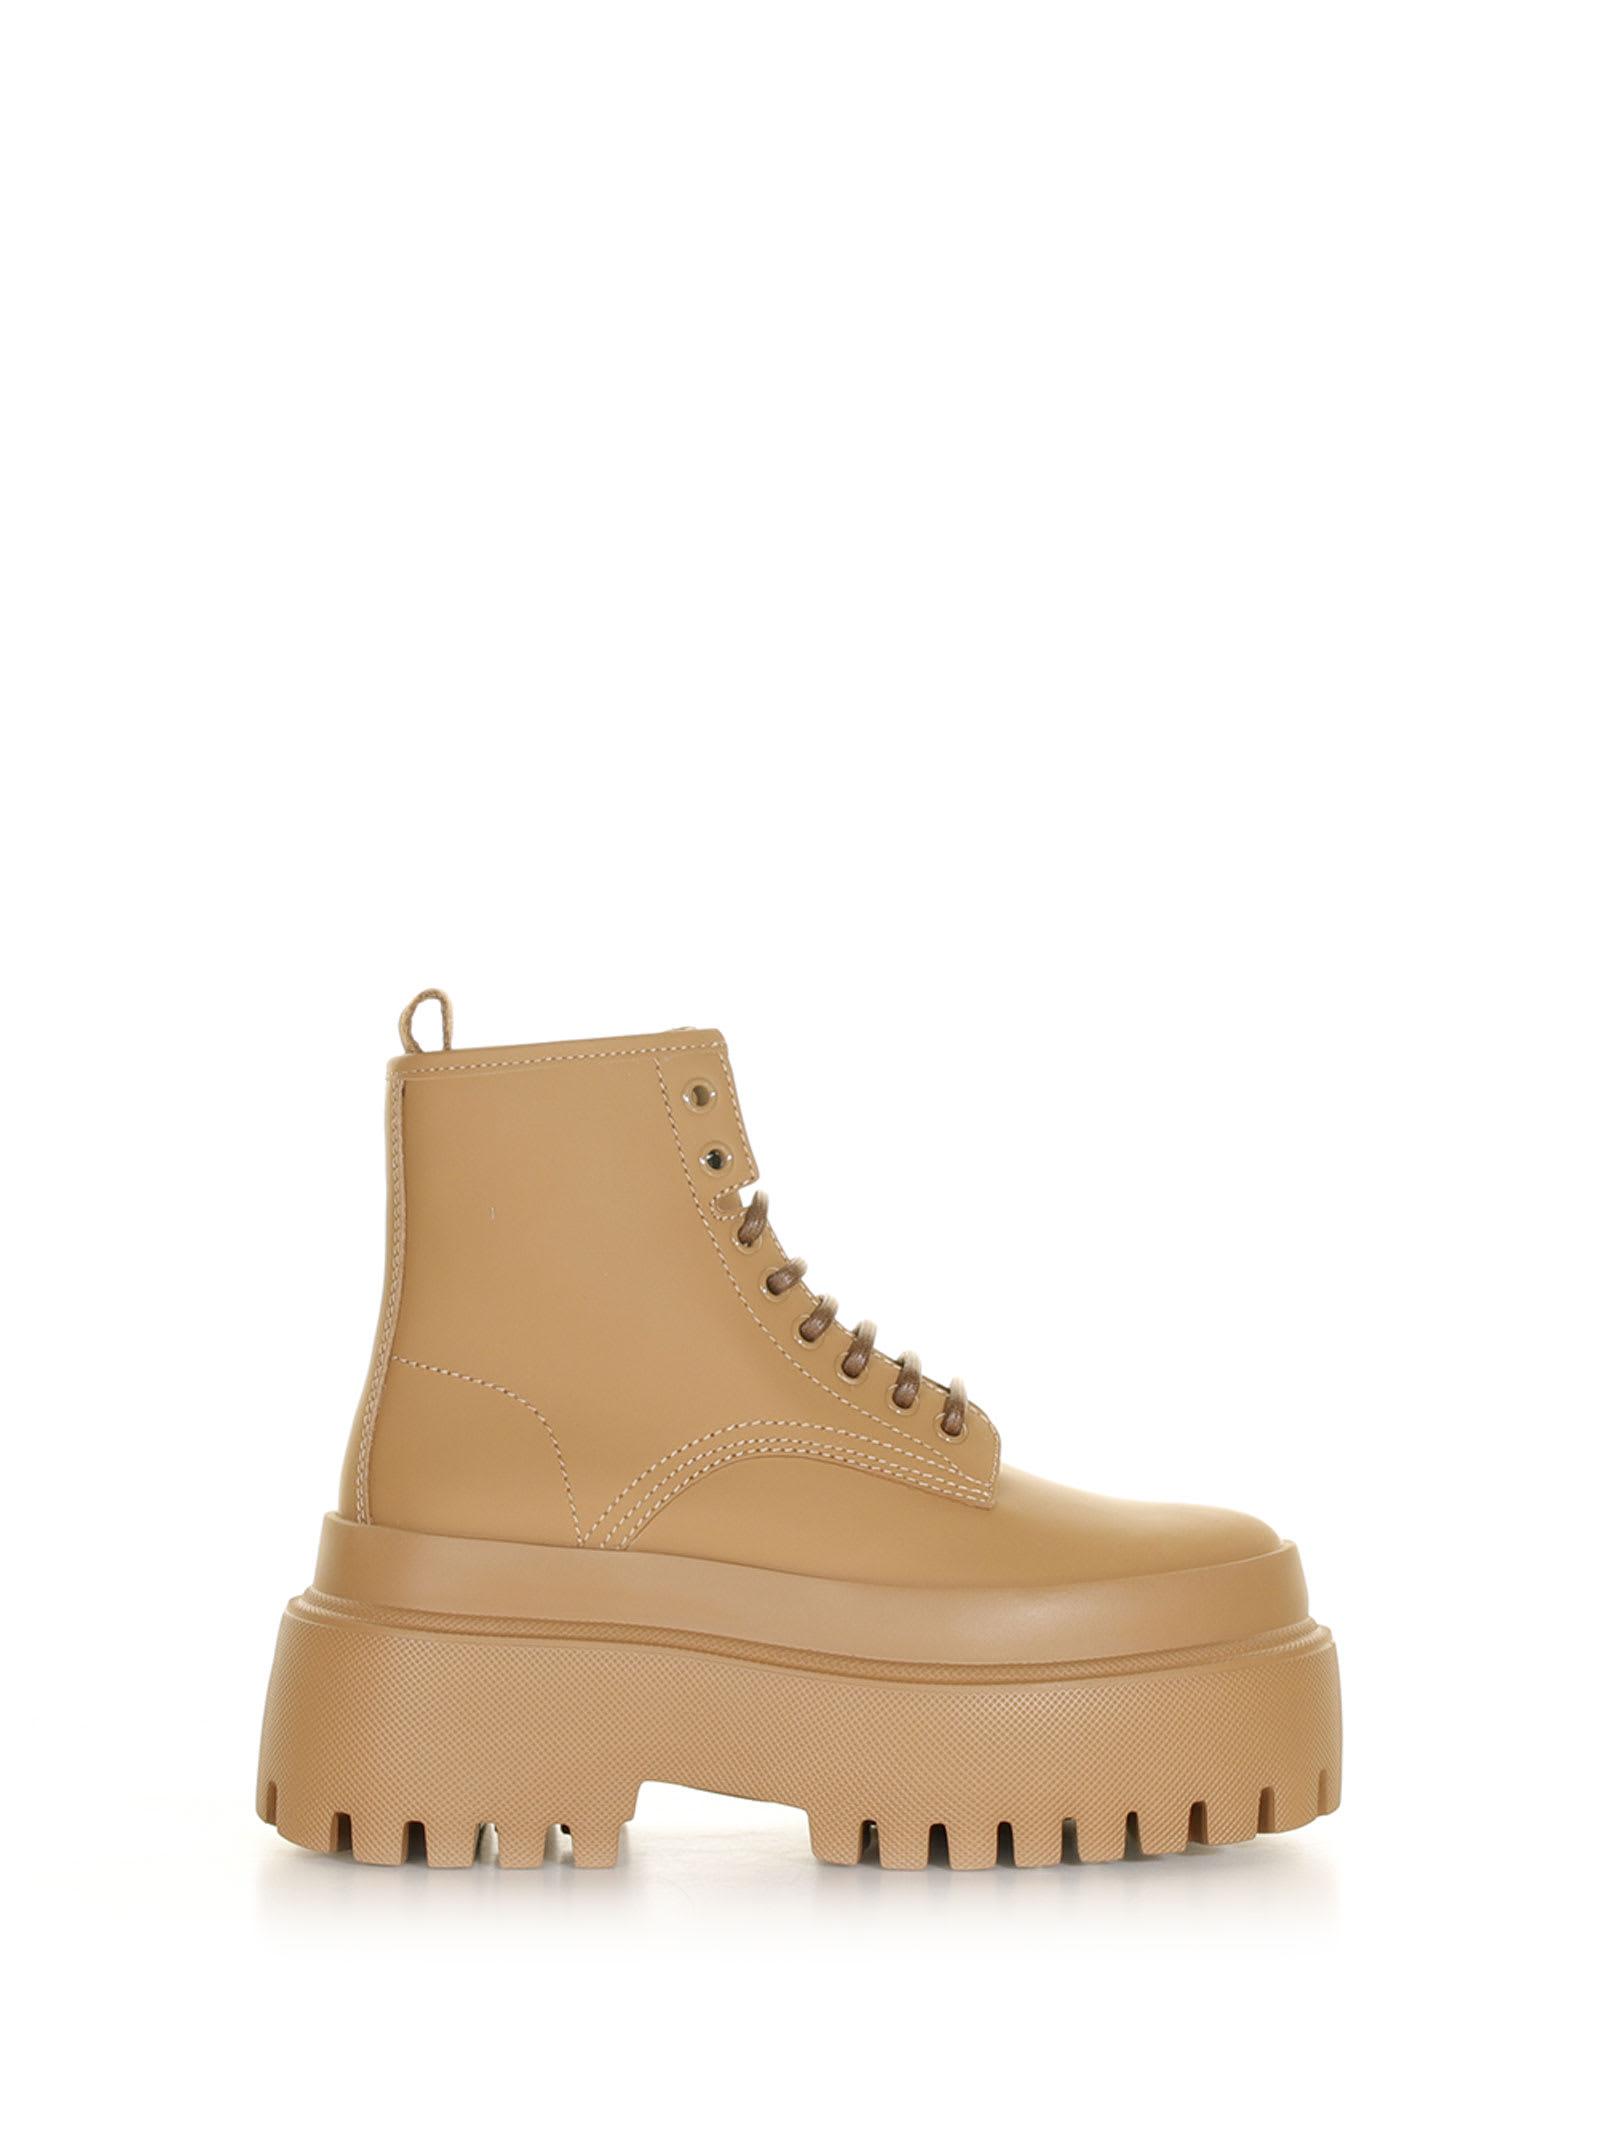 Dolce & Gabbana Leather Ankle Boot With Laces in Natural | Lyst